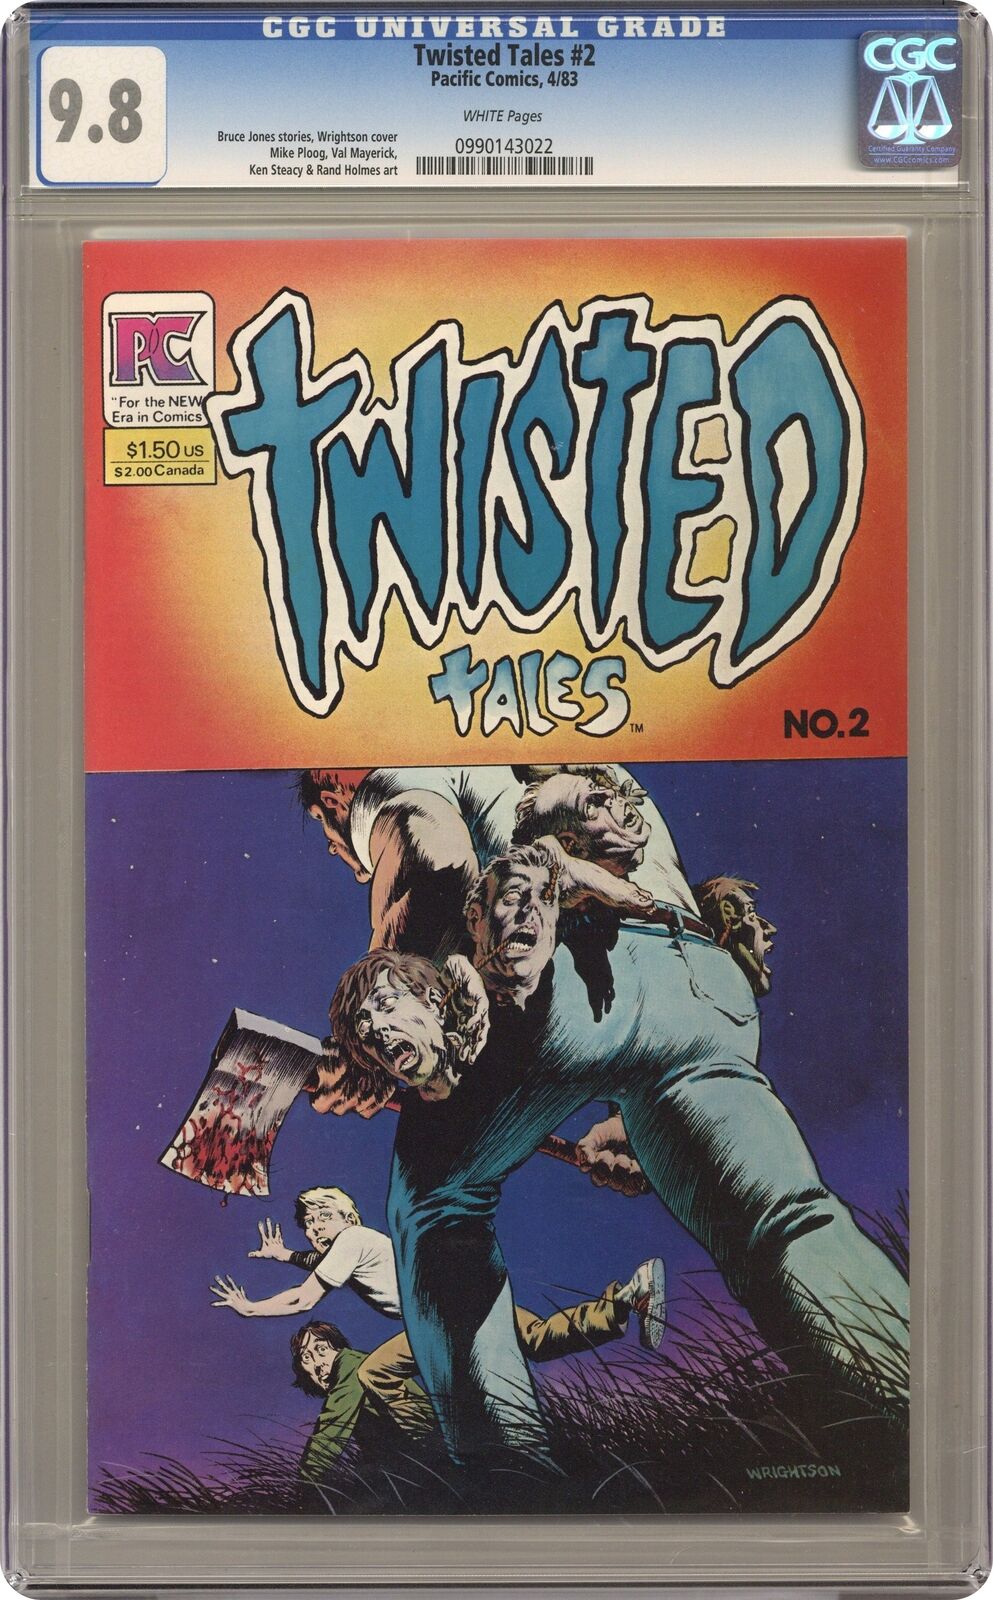 Twisted Tales #2 CGC 9.8 1983 0990143022